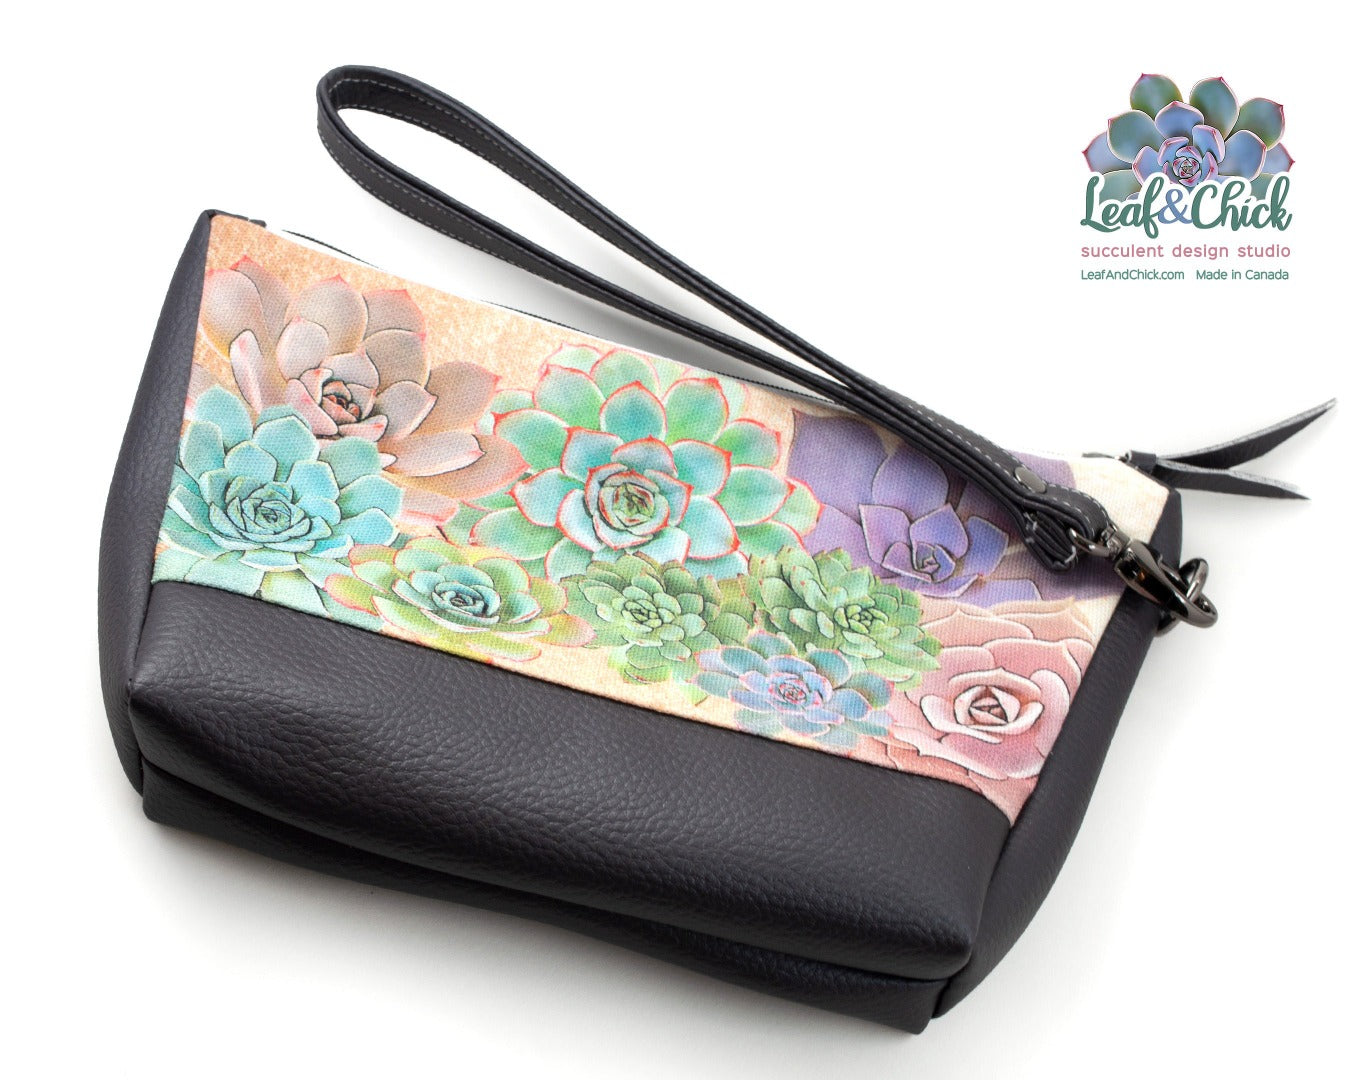 anthracite succulent clutch bag exclusive to Leaf & Chick